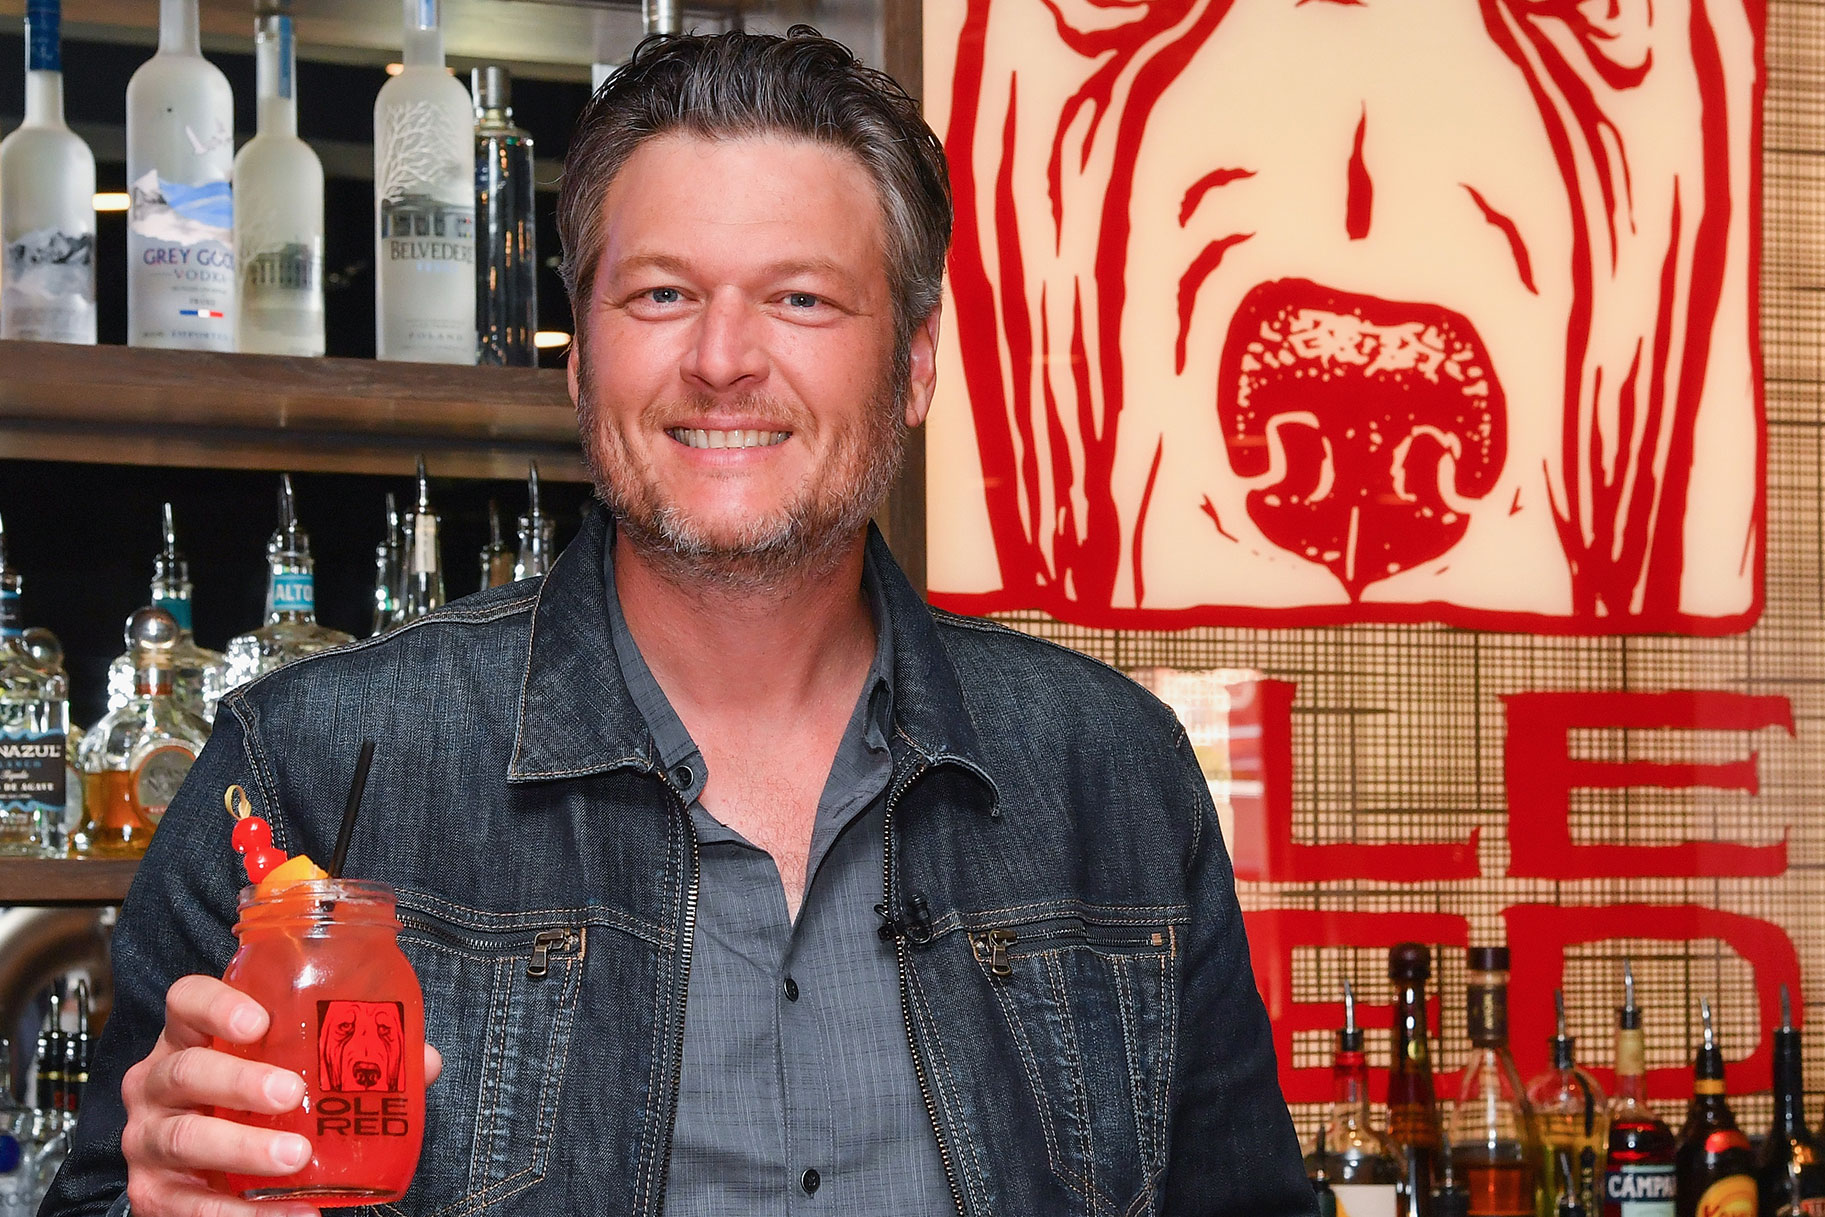 Blake Shelton holding a mixed drink in front of a bar